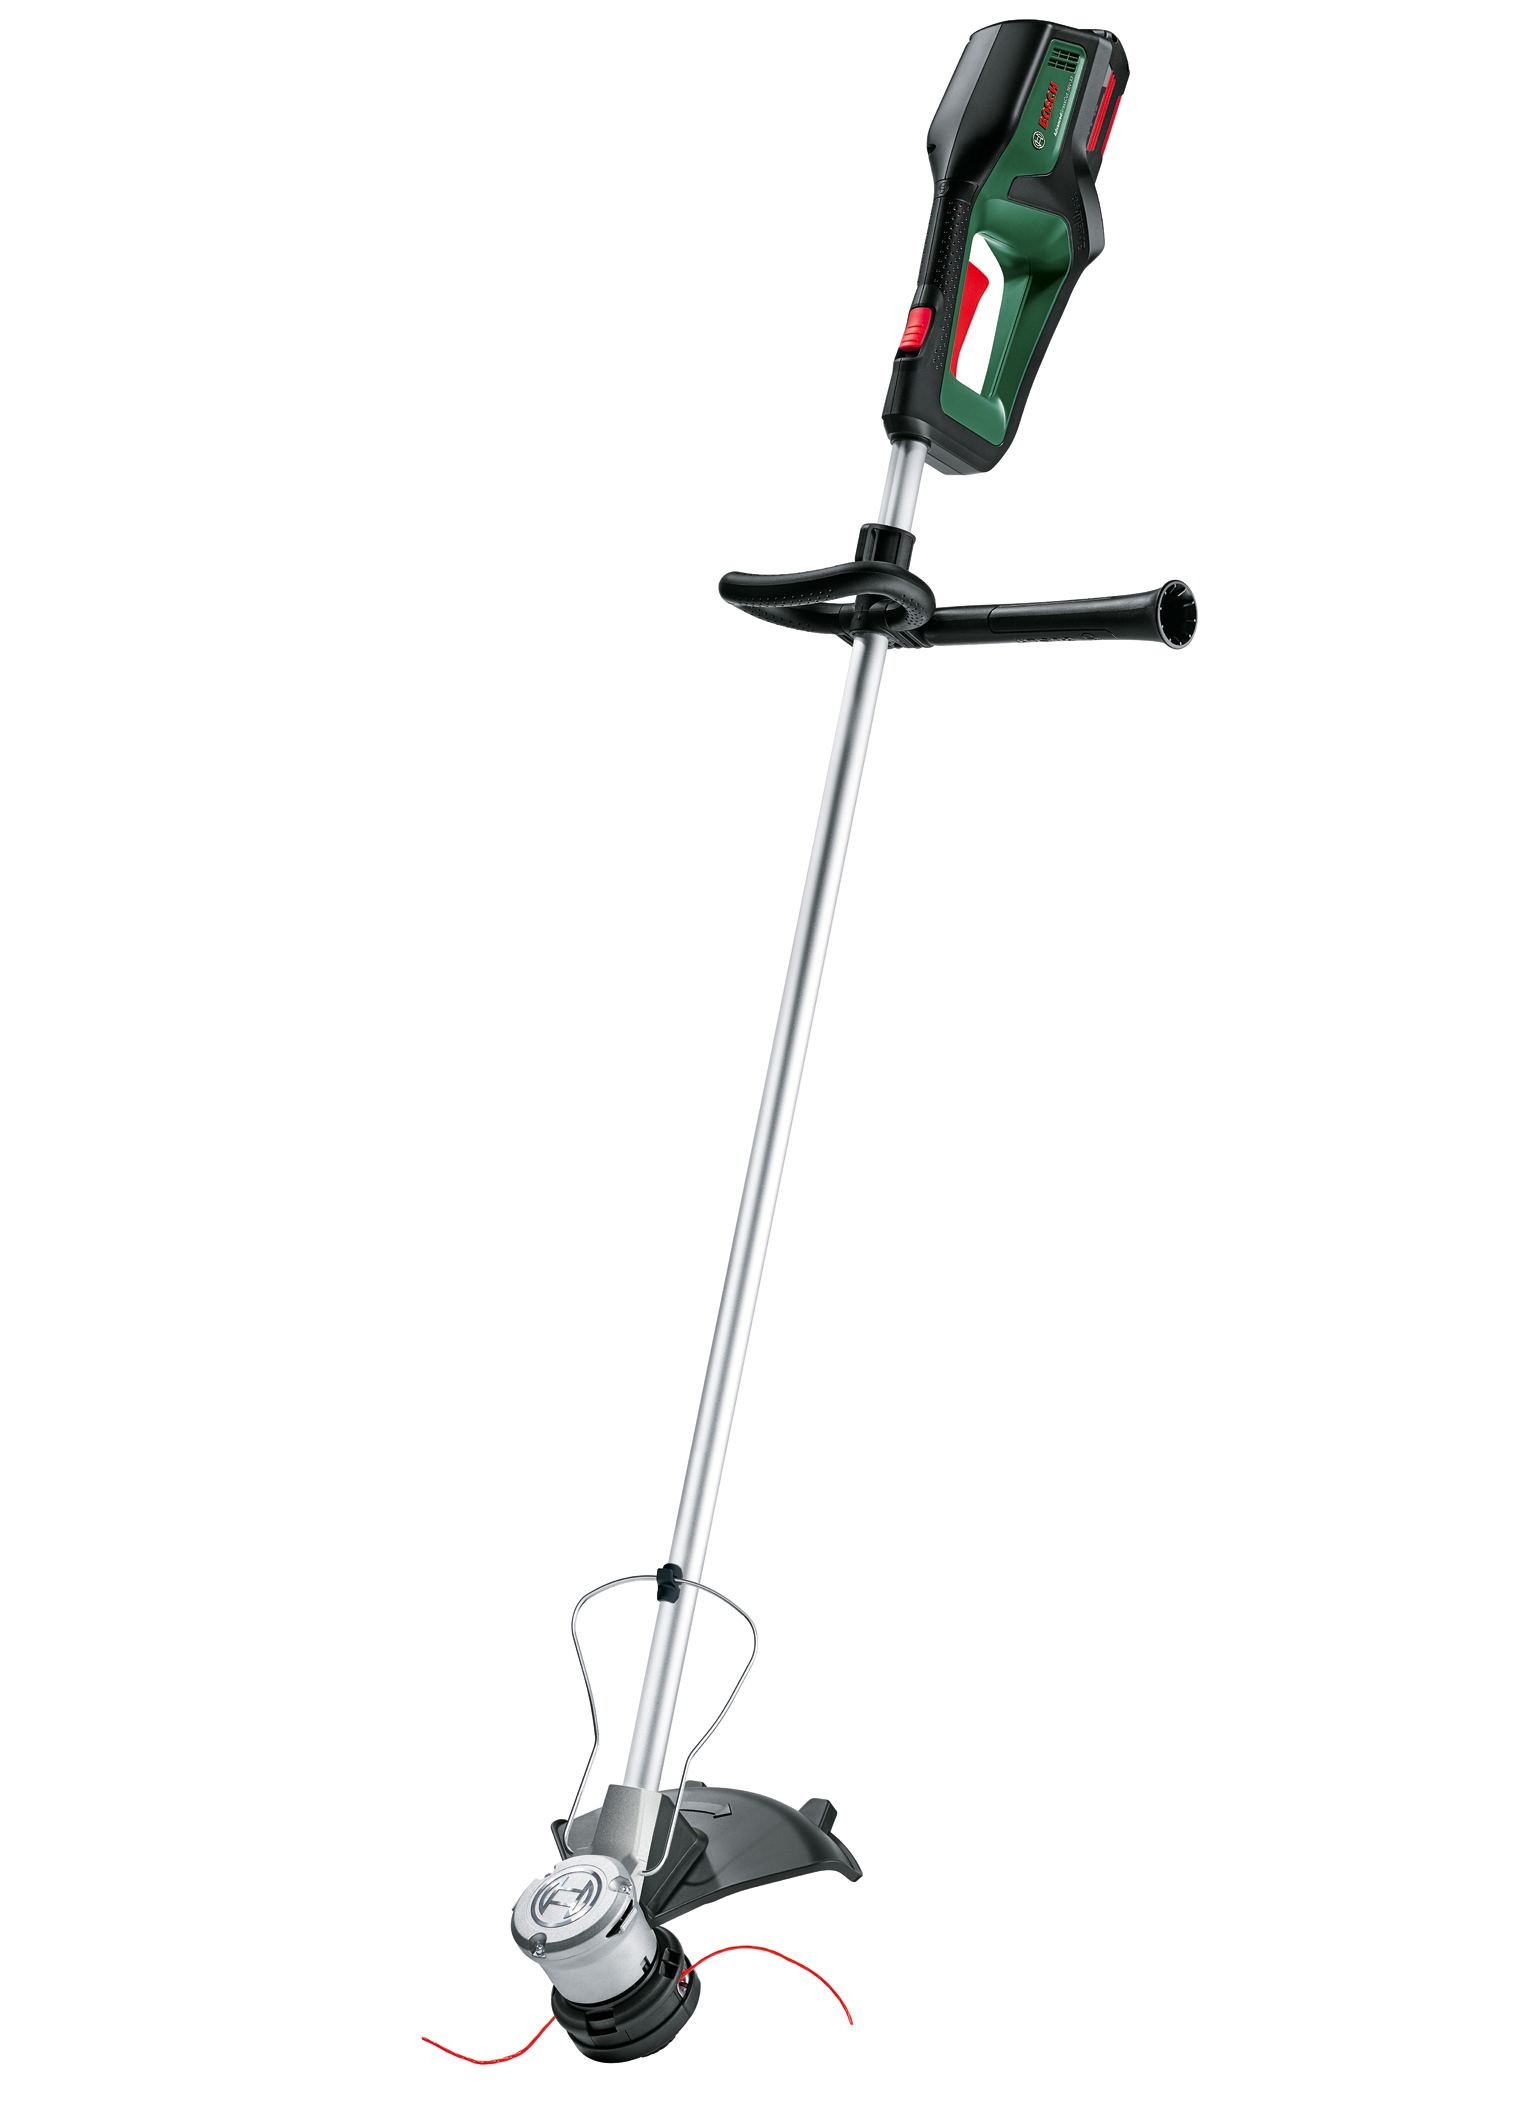 Expansion of the ‘36V Power for All System’: AdvancedGrassCut 36V-33 cordless grass trimmer from Bosch